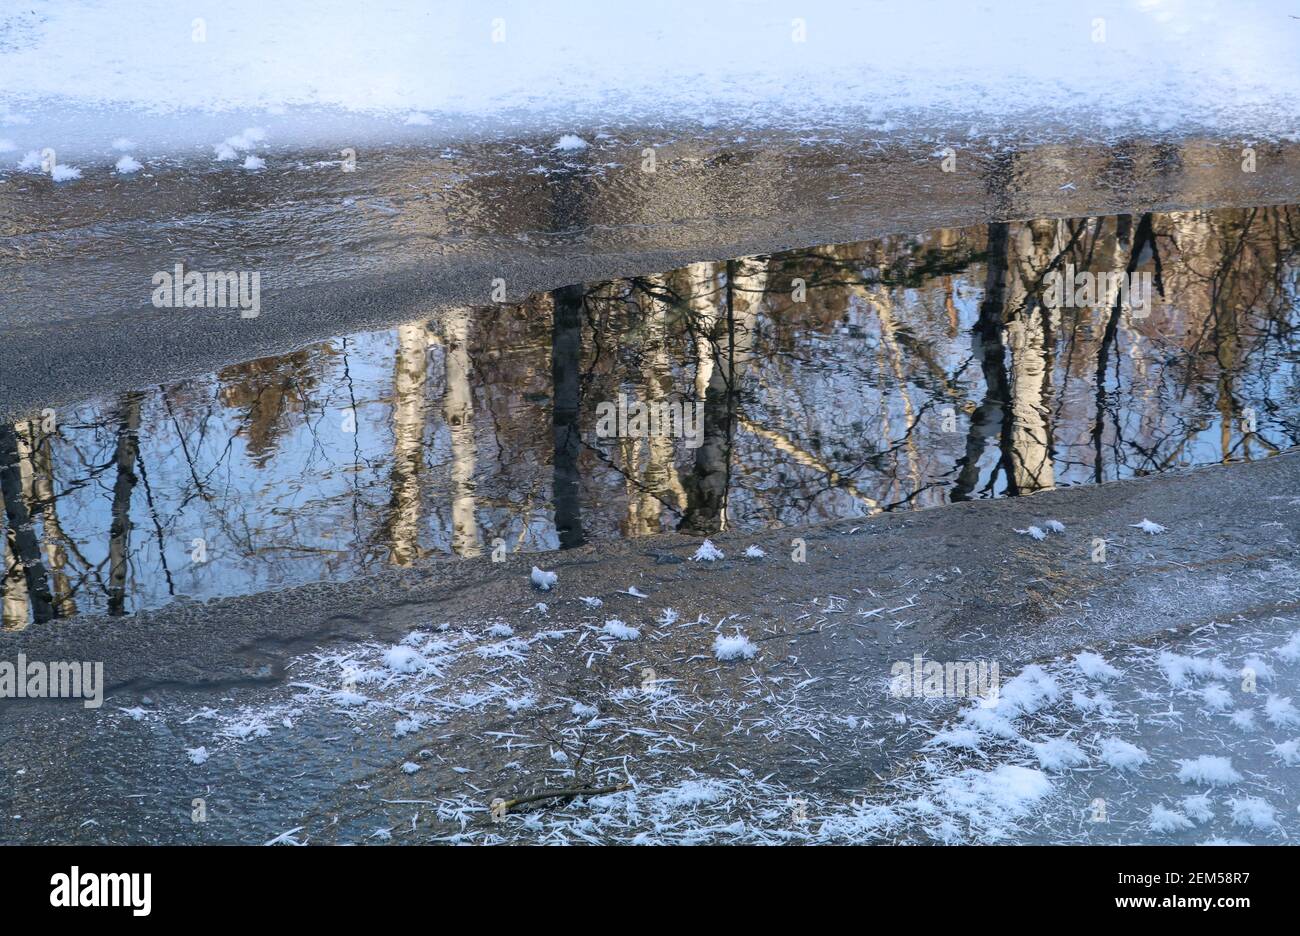 Reflection of birch trees in the water of a frozen lake Stock Photo